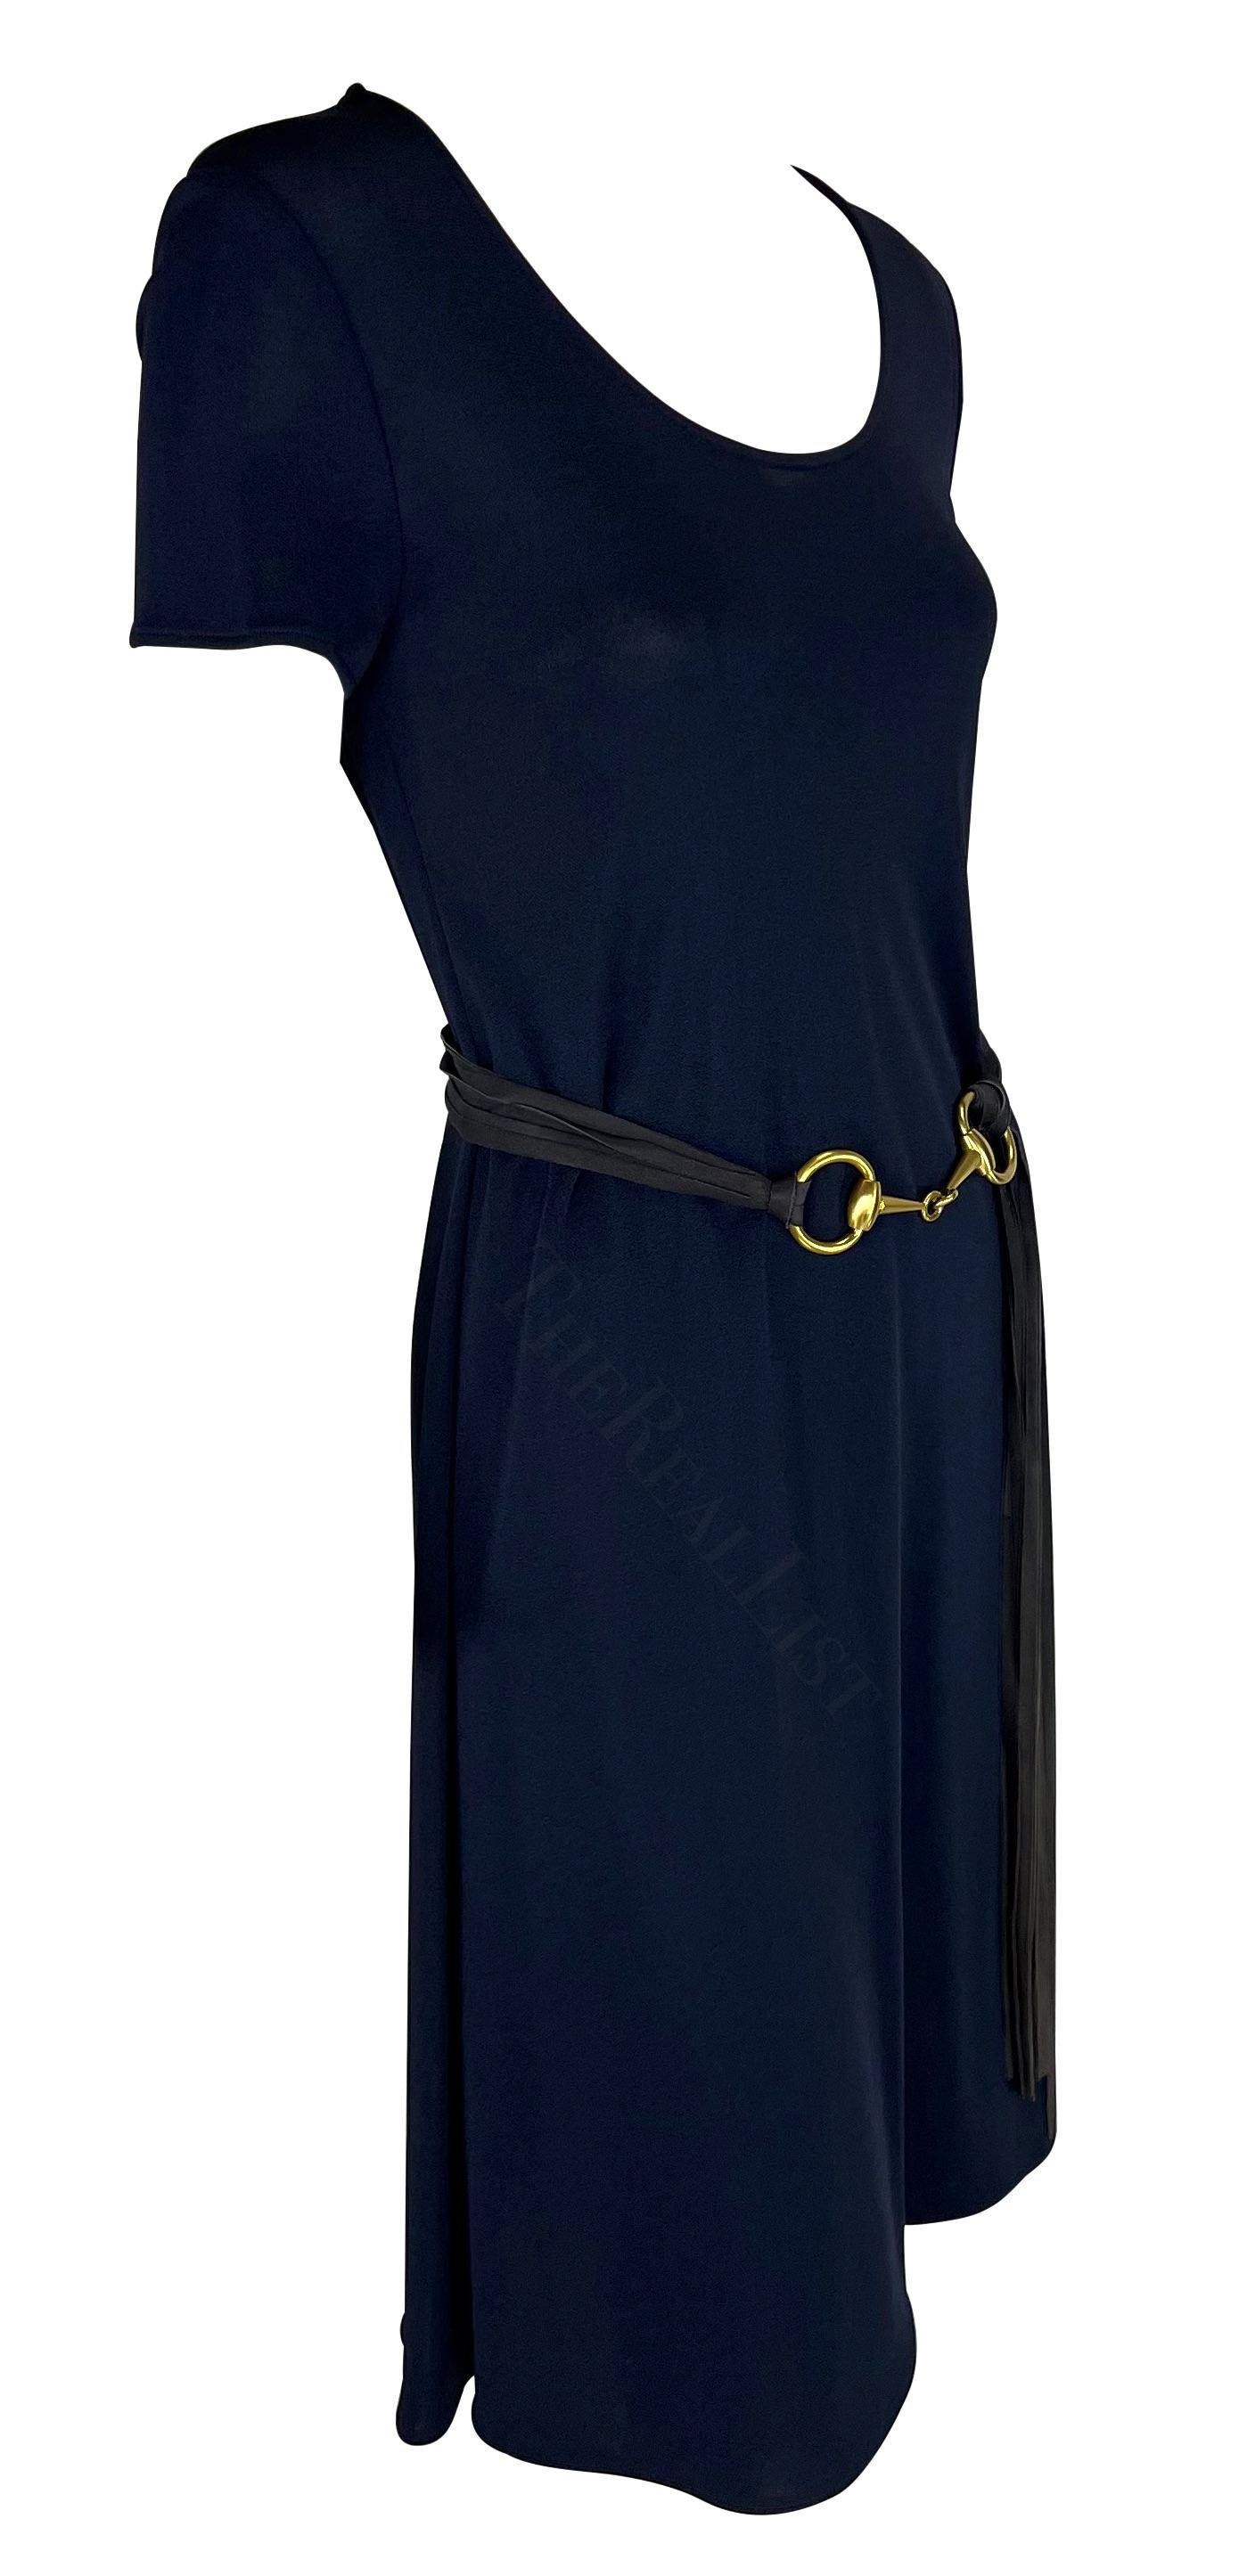 S/S 1994 Gucci Navy Semi Sheer Shift Dress with Gold Horsebit Belt For Sale 1